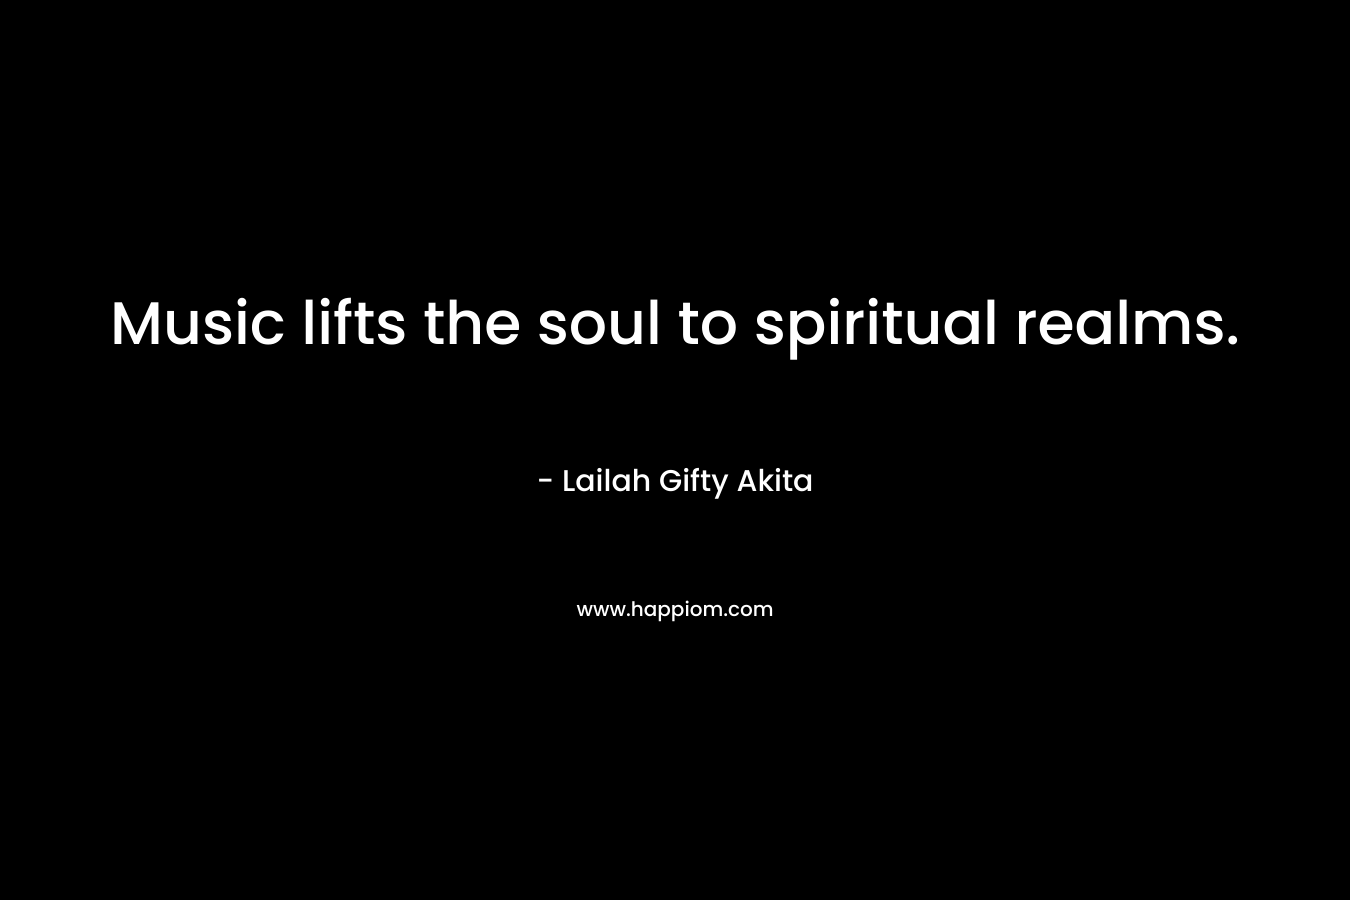 Music lifts the soul to spiritual realms.